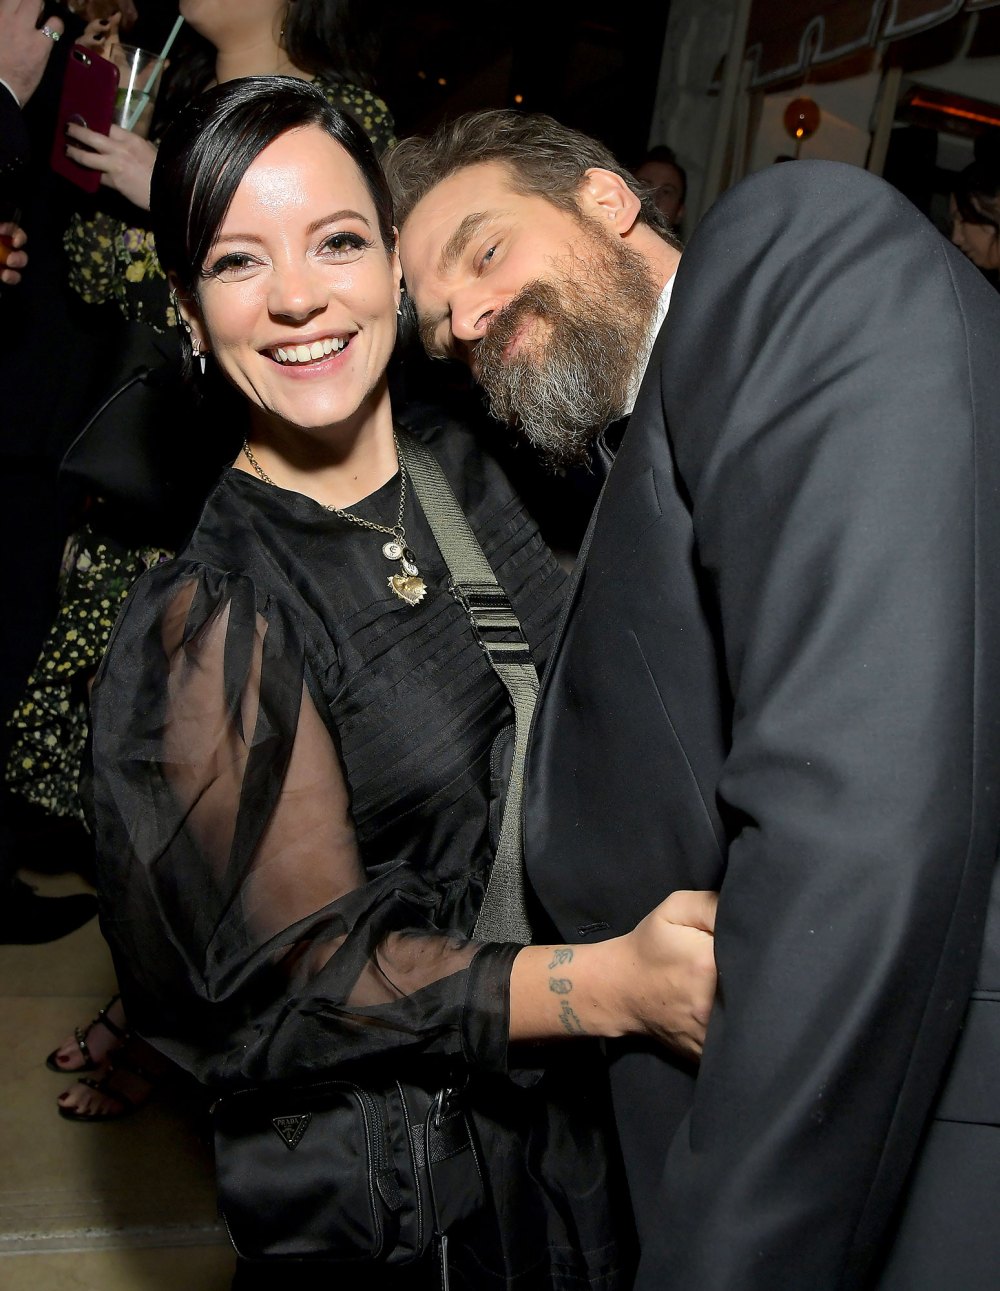 Lily Allen Says She Sometimes Turns Down David Harbour's NSFW 2 Requests